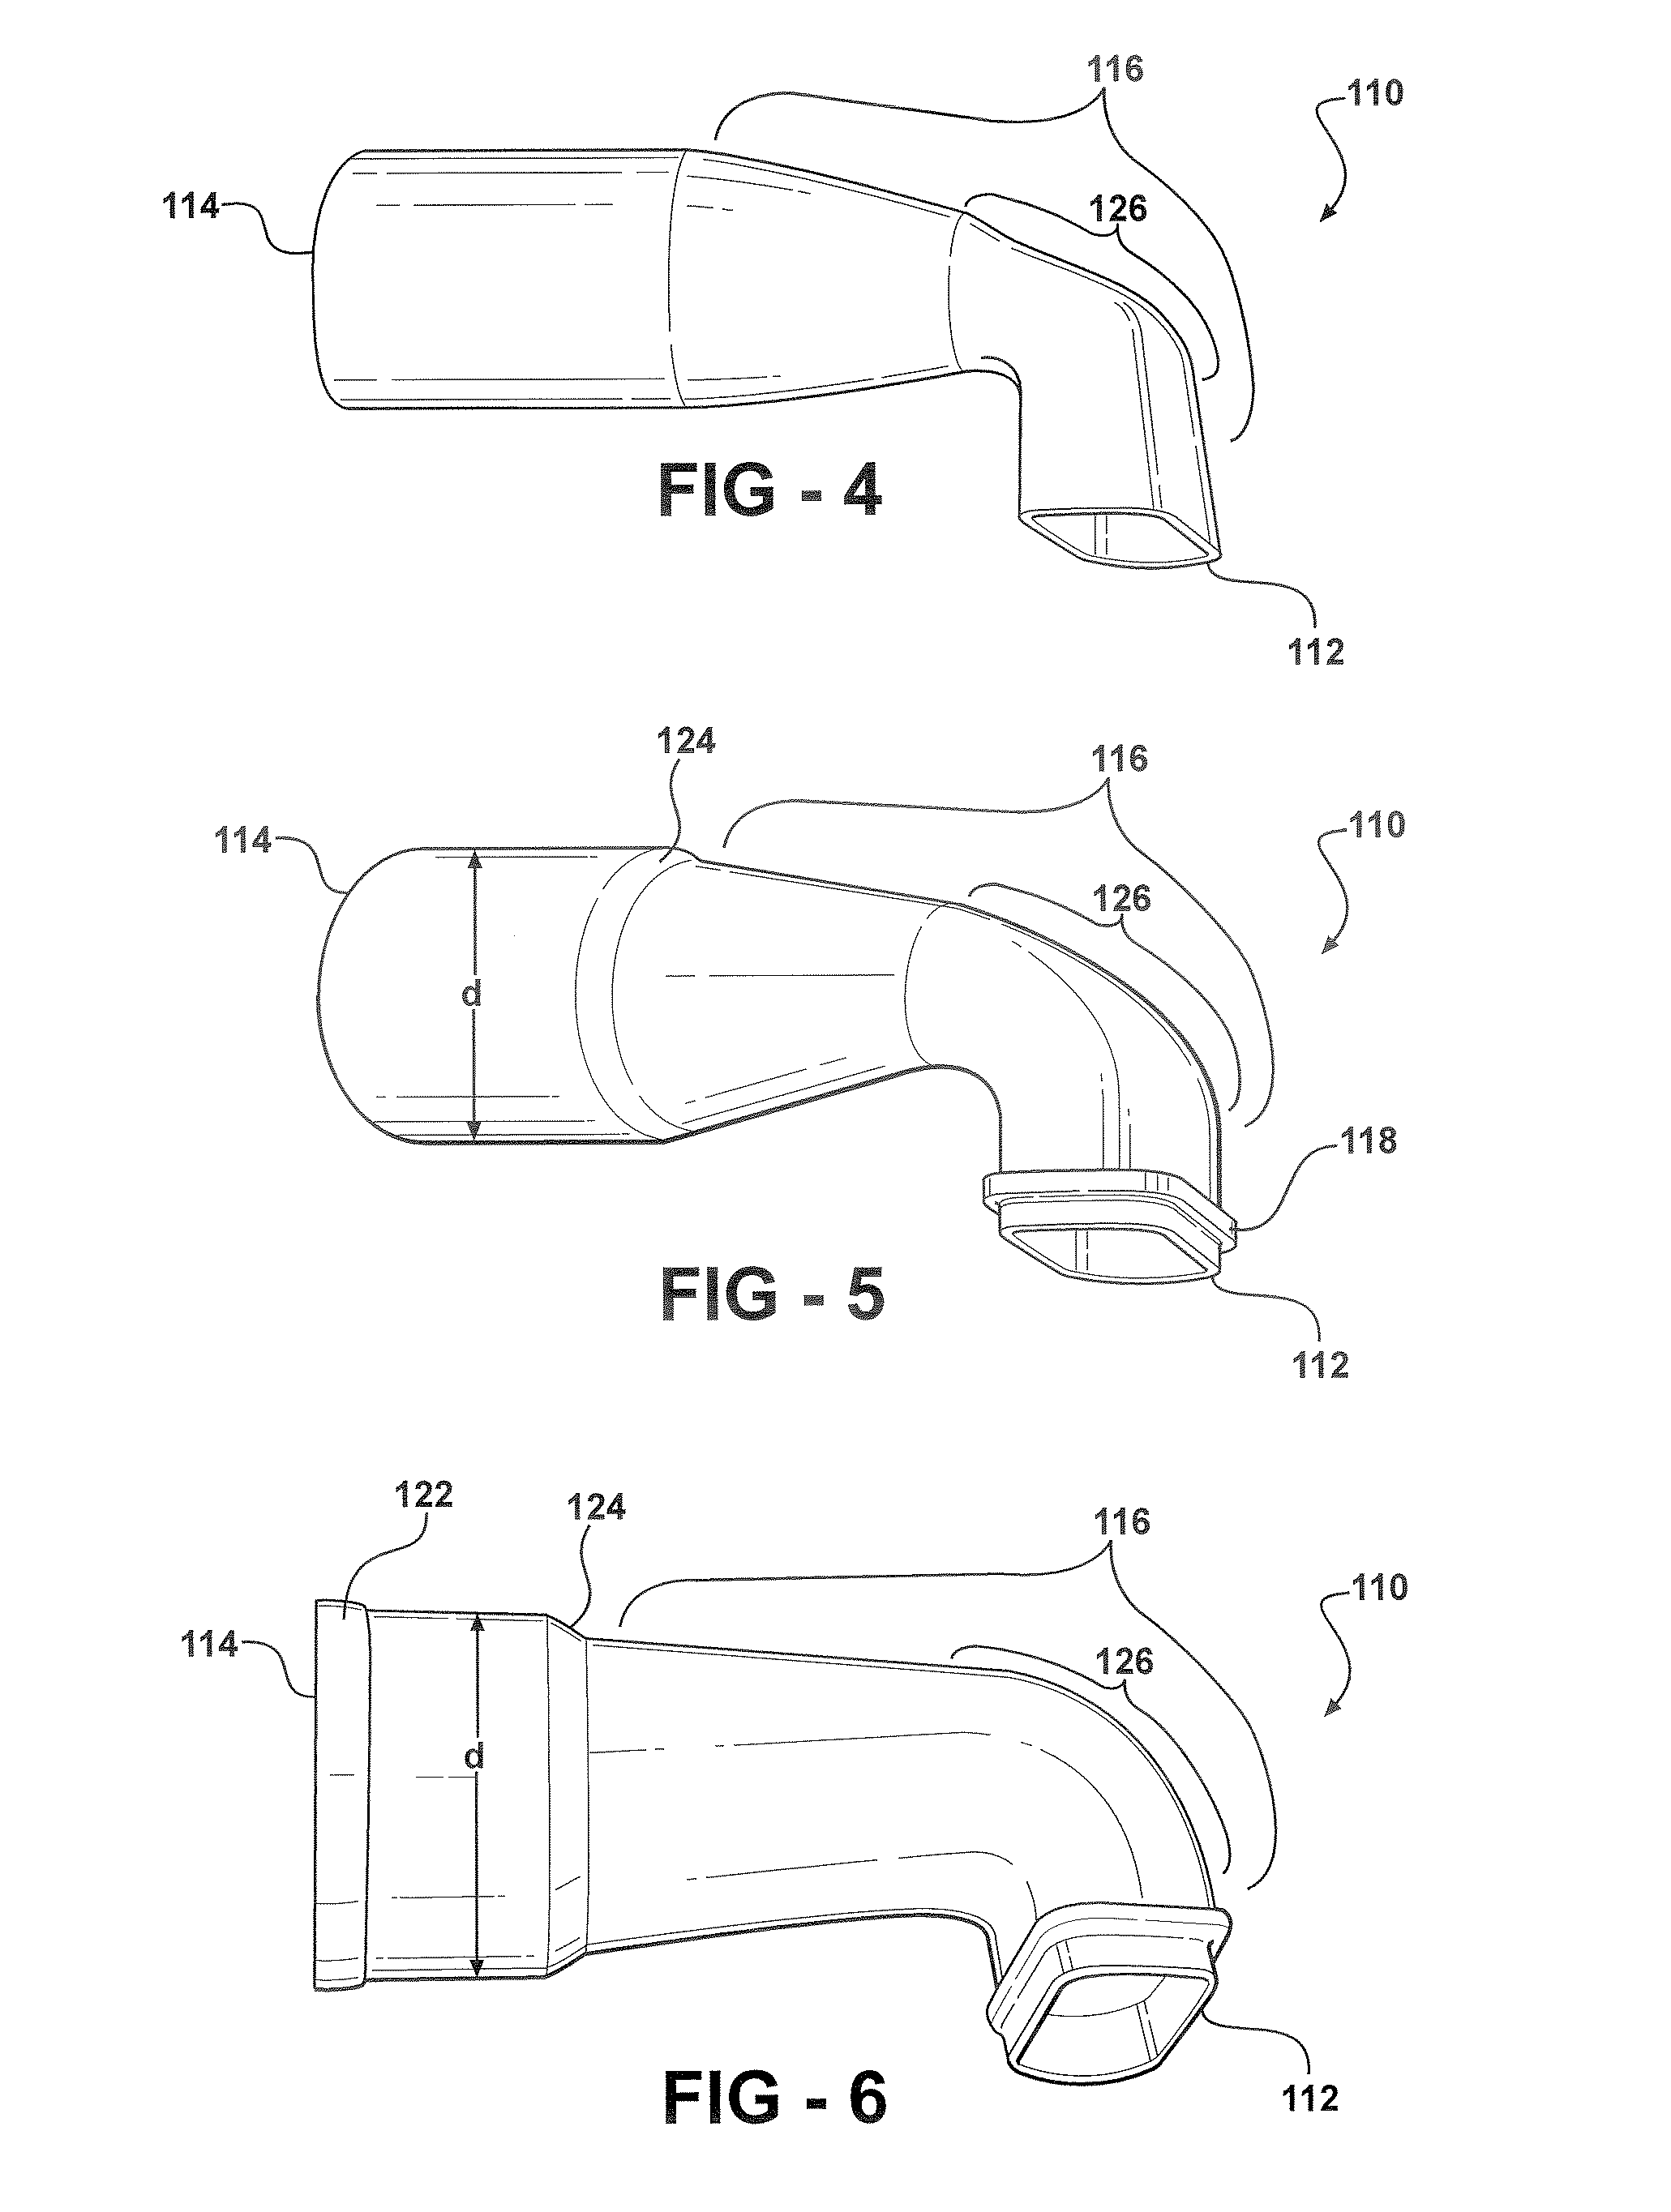 Method of forming a heater core connector